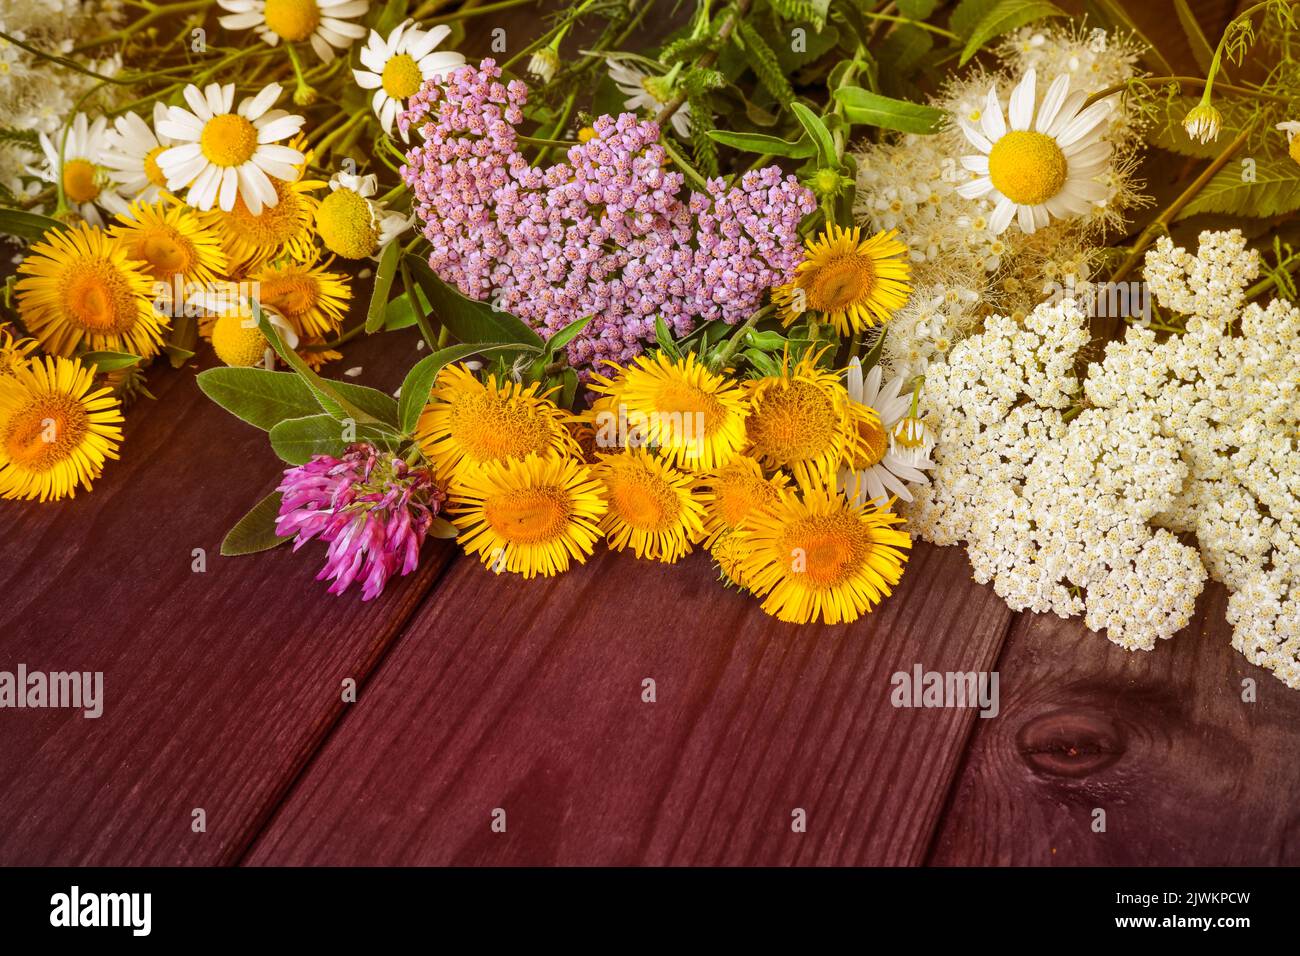 Natural floral background, a bouquet of wild flowers on a wooden table. Stock Photo